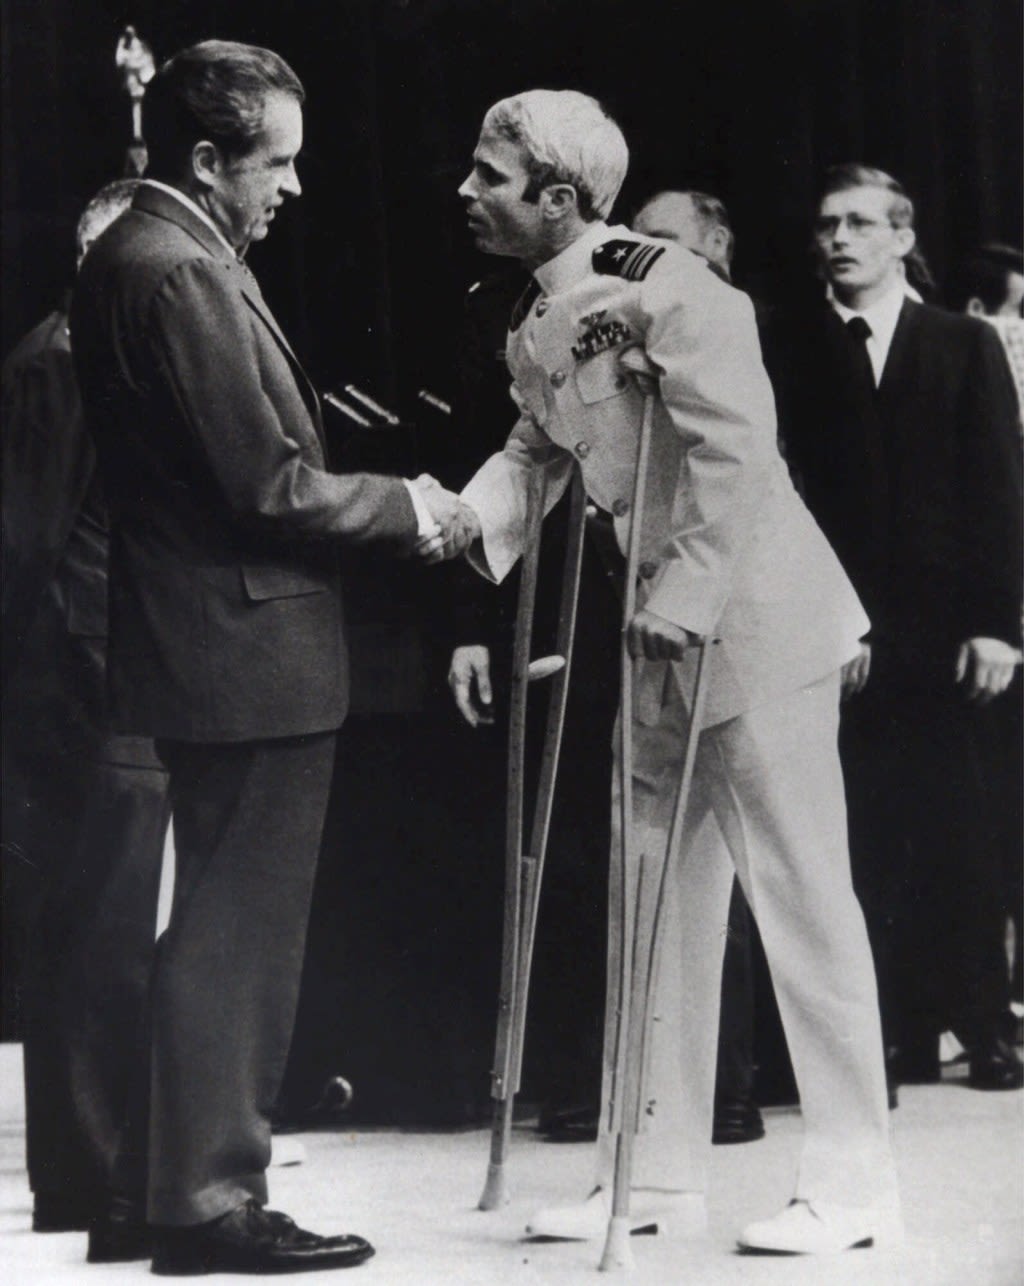 Throwback Thursday: Nixon greets McCain after release